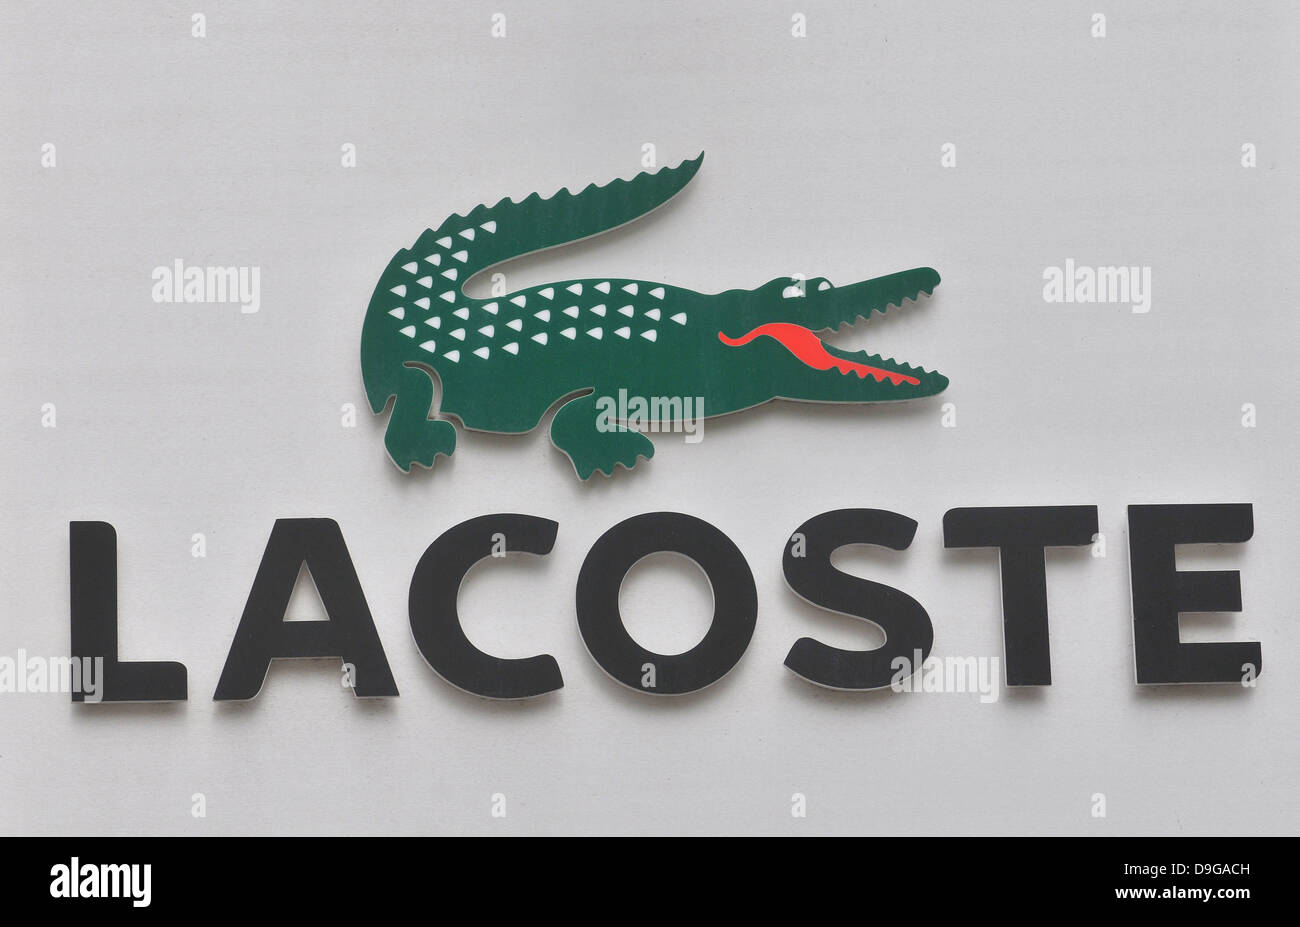 Lacoste Crocodile High Resolution Stock Photography and Images - Alamy